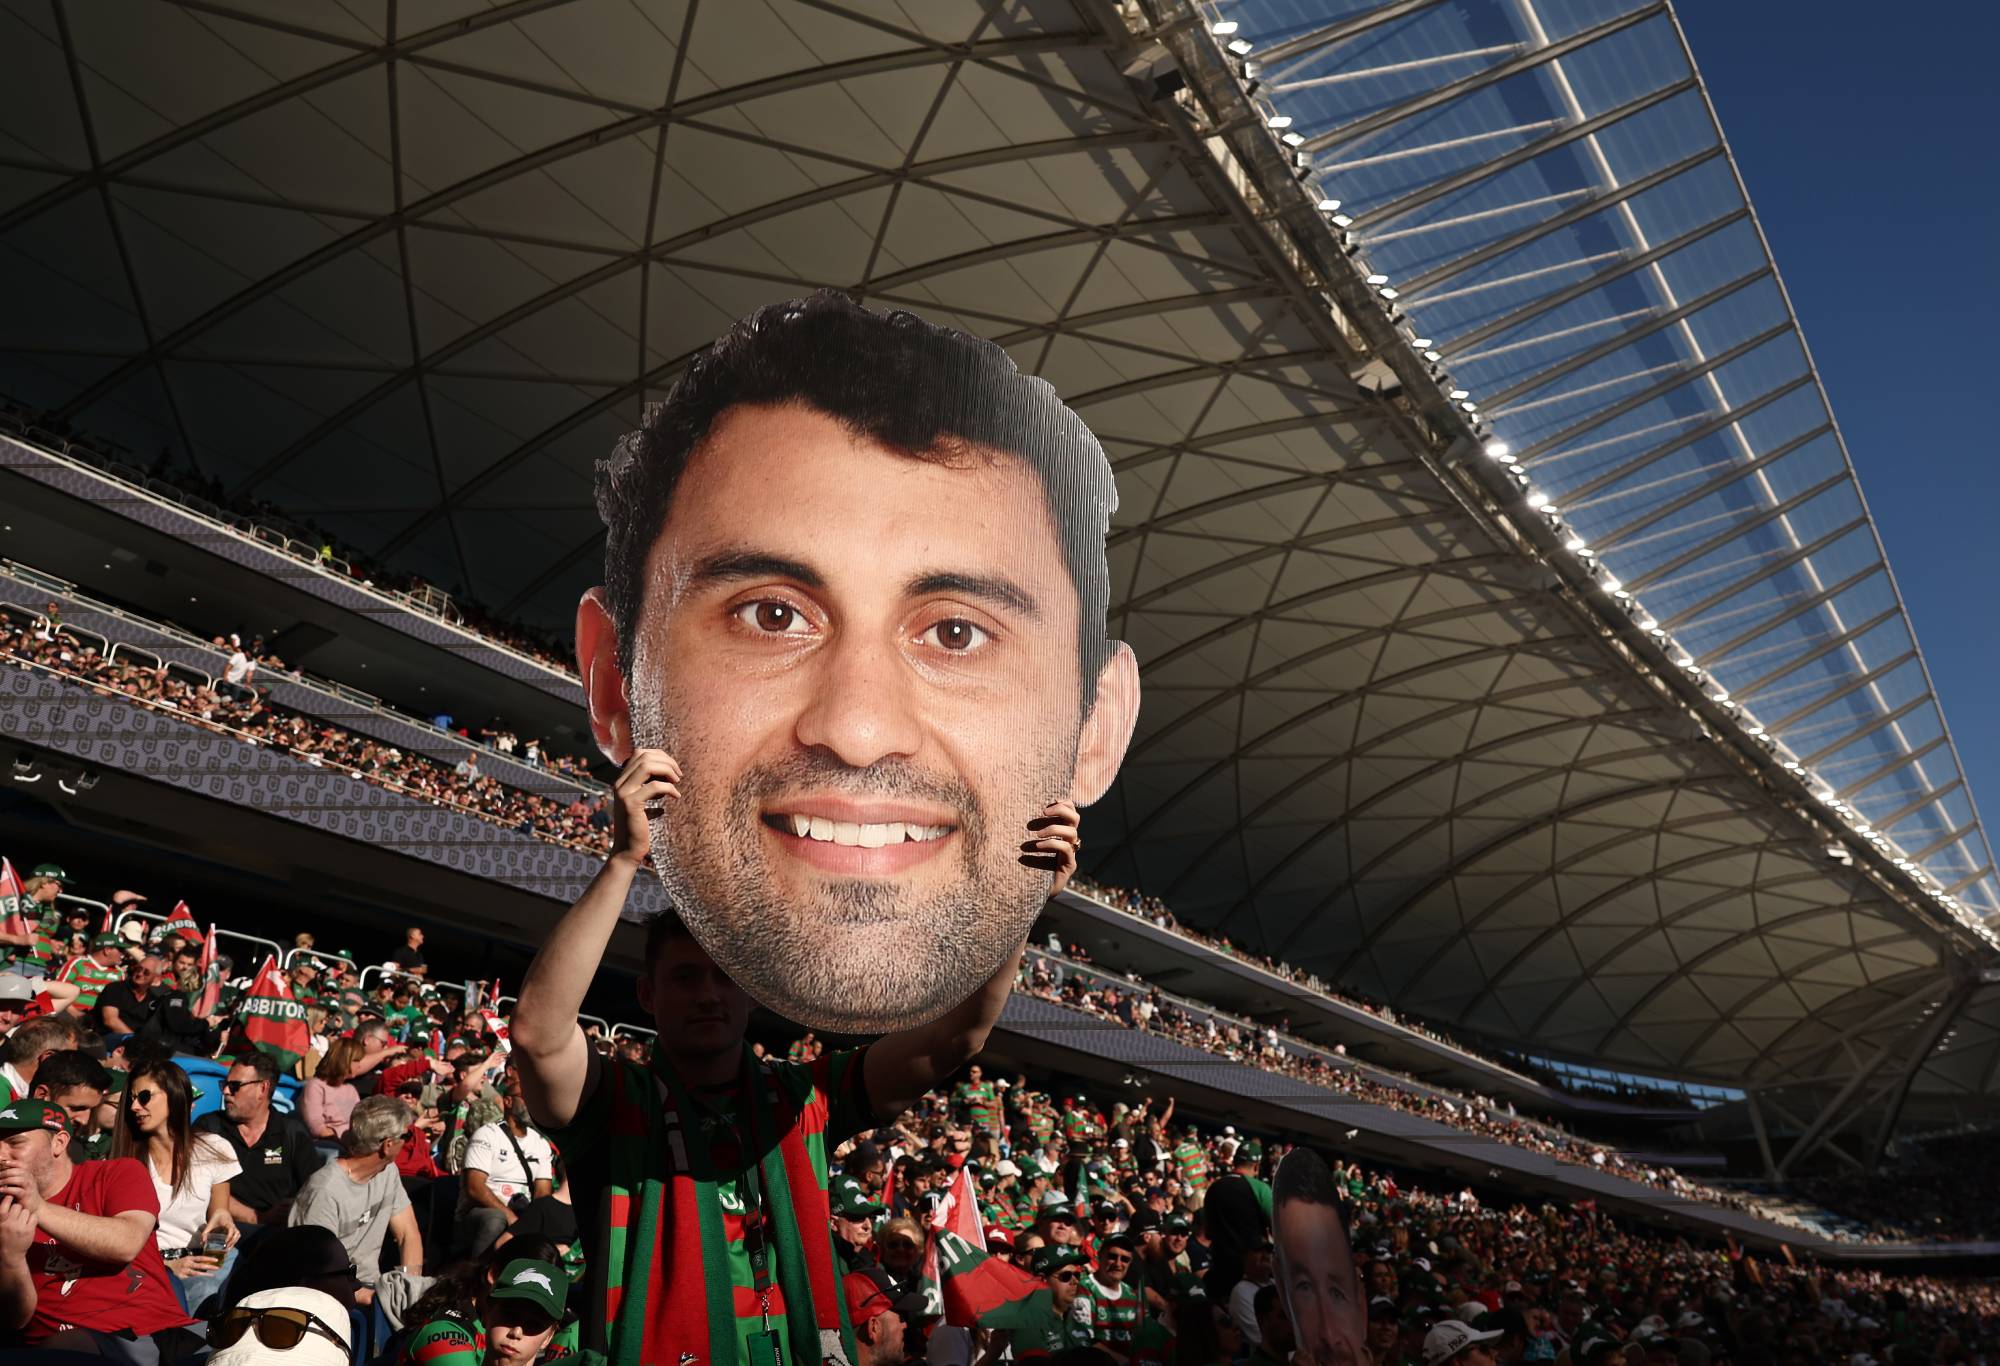 SYDNEY, AUSTRALIA - SEPTEMBER 11: A fan shows their support for Alex Johnston of the Rabbitohs ahead of the NRL Elimination Final match between the Sydney Roosters and the South Sydney Rabbitohs at Allianz Stadium on September 11, 2022 in Sydney, Australia. (Photo by Matt King/Getty Images)